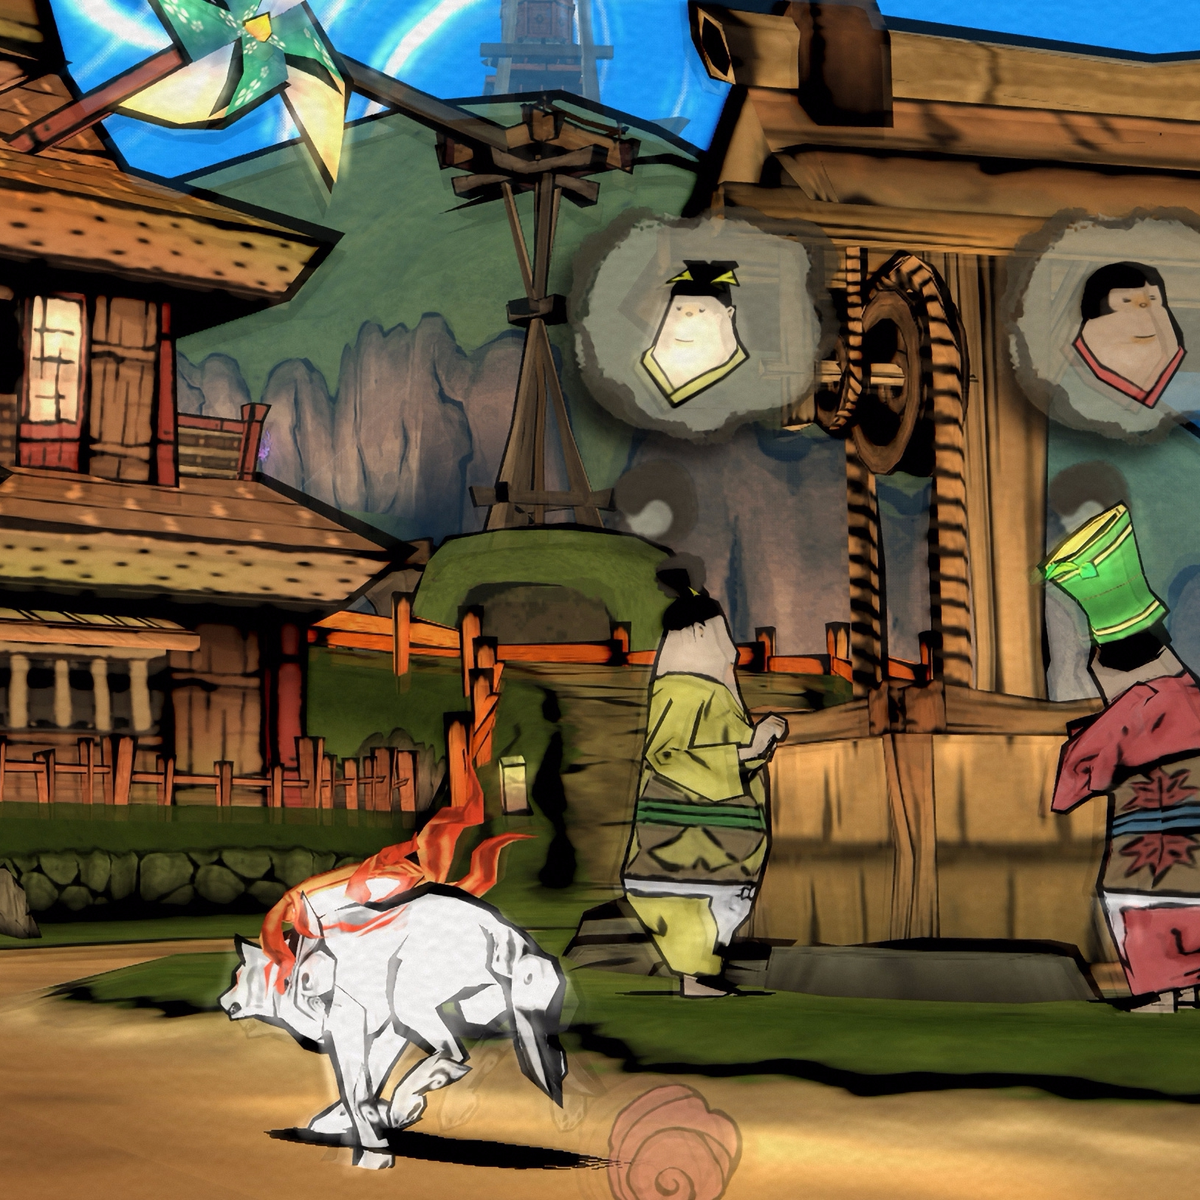 Okami HD is coming to the west in December